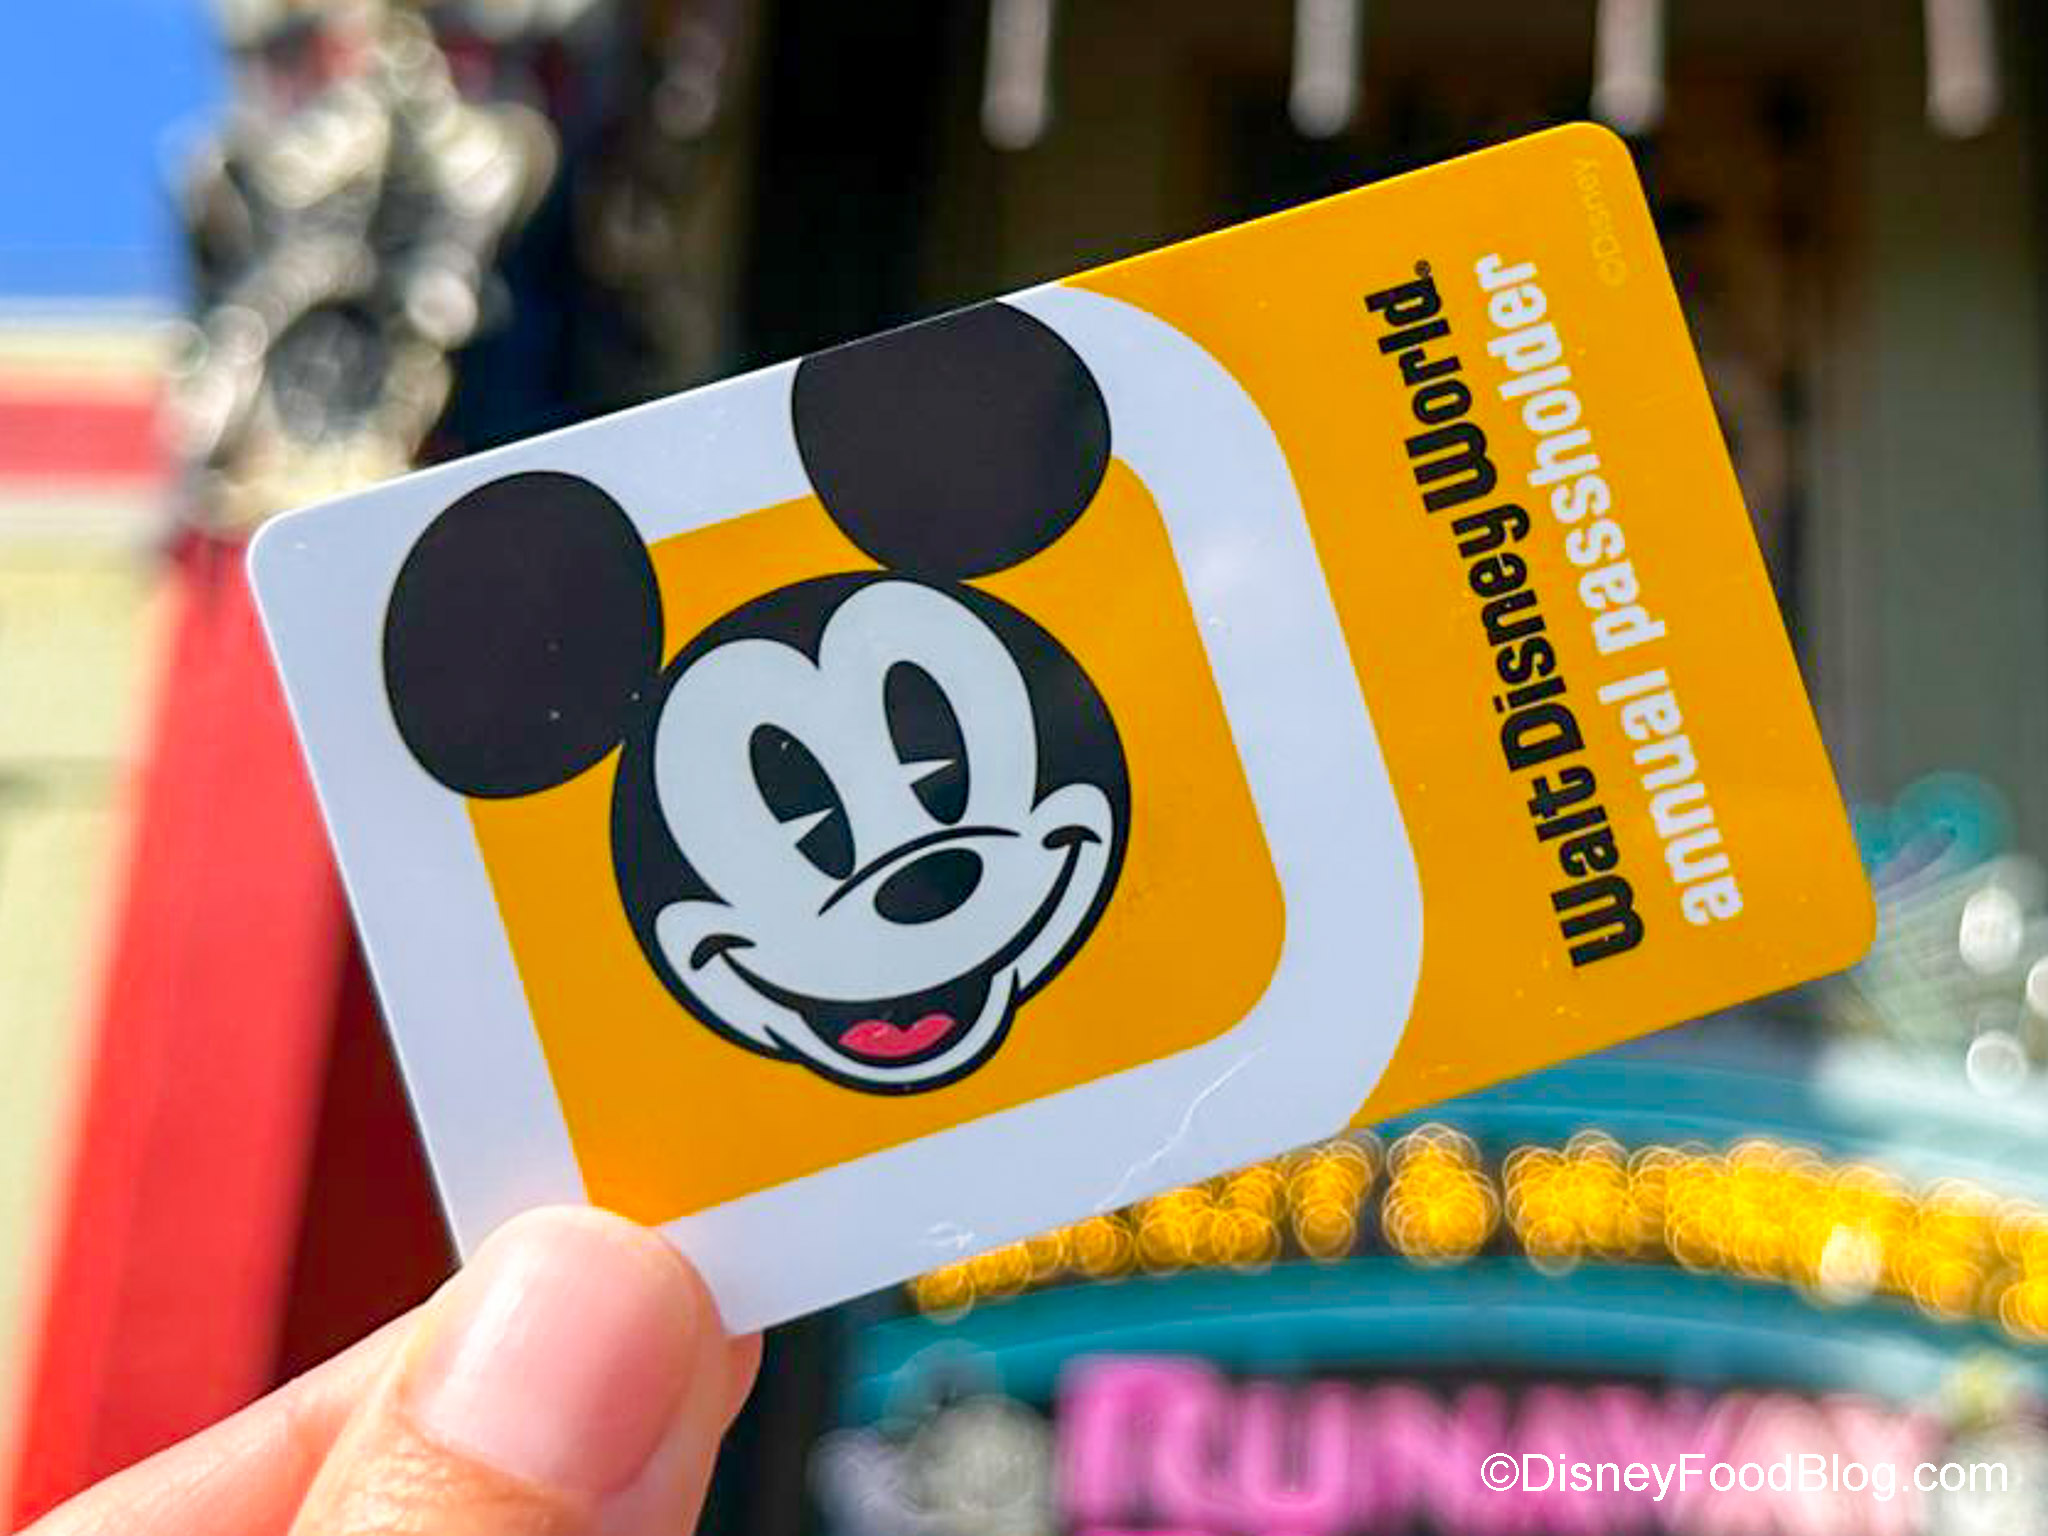 STEPBYSTEP GUIDE How to Buy a Disney World Annual Pass Disney by Mark